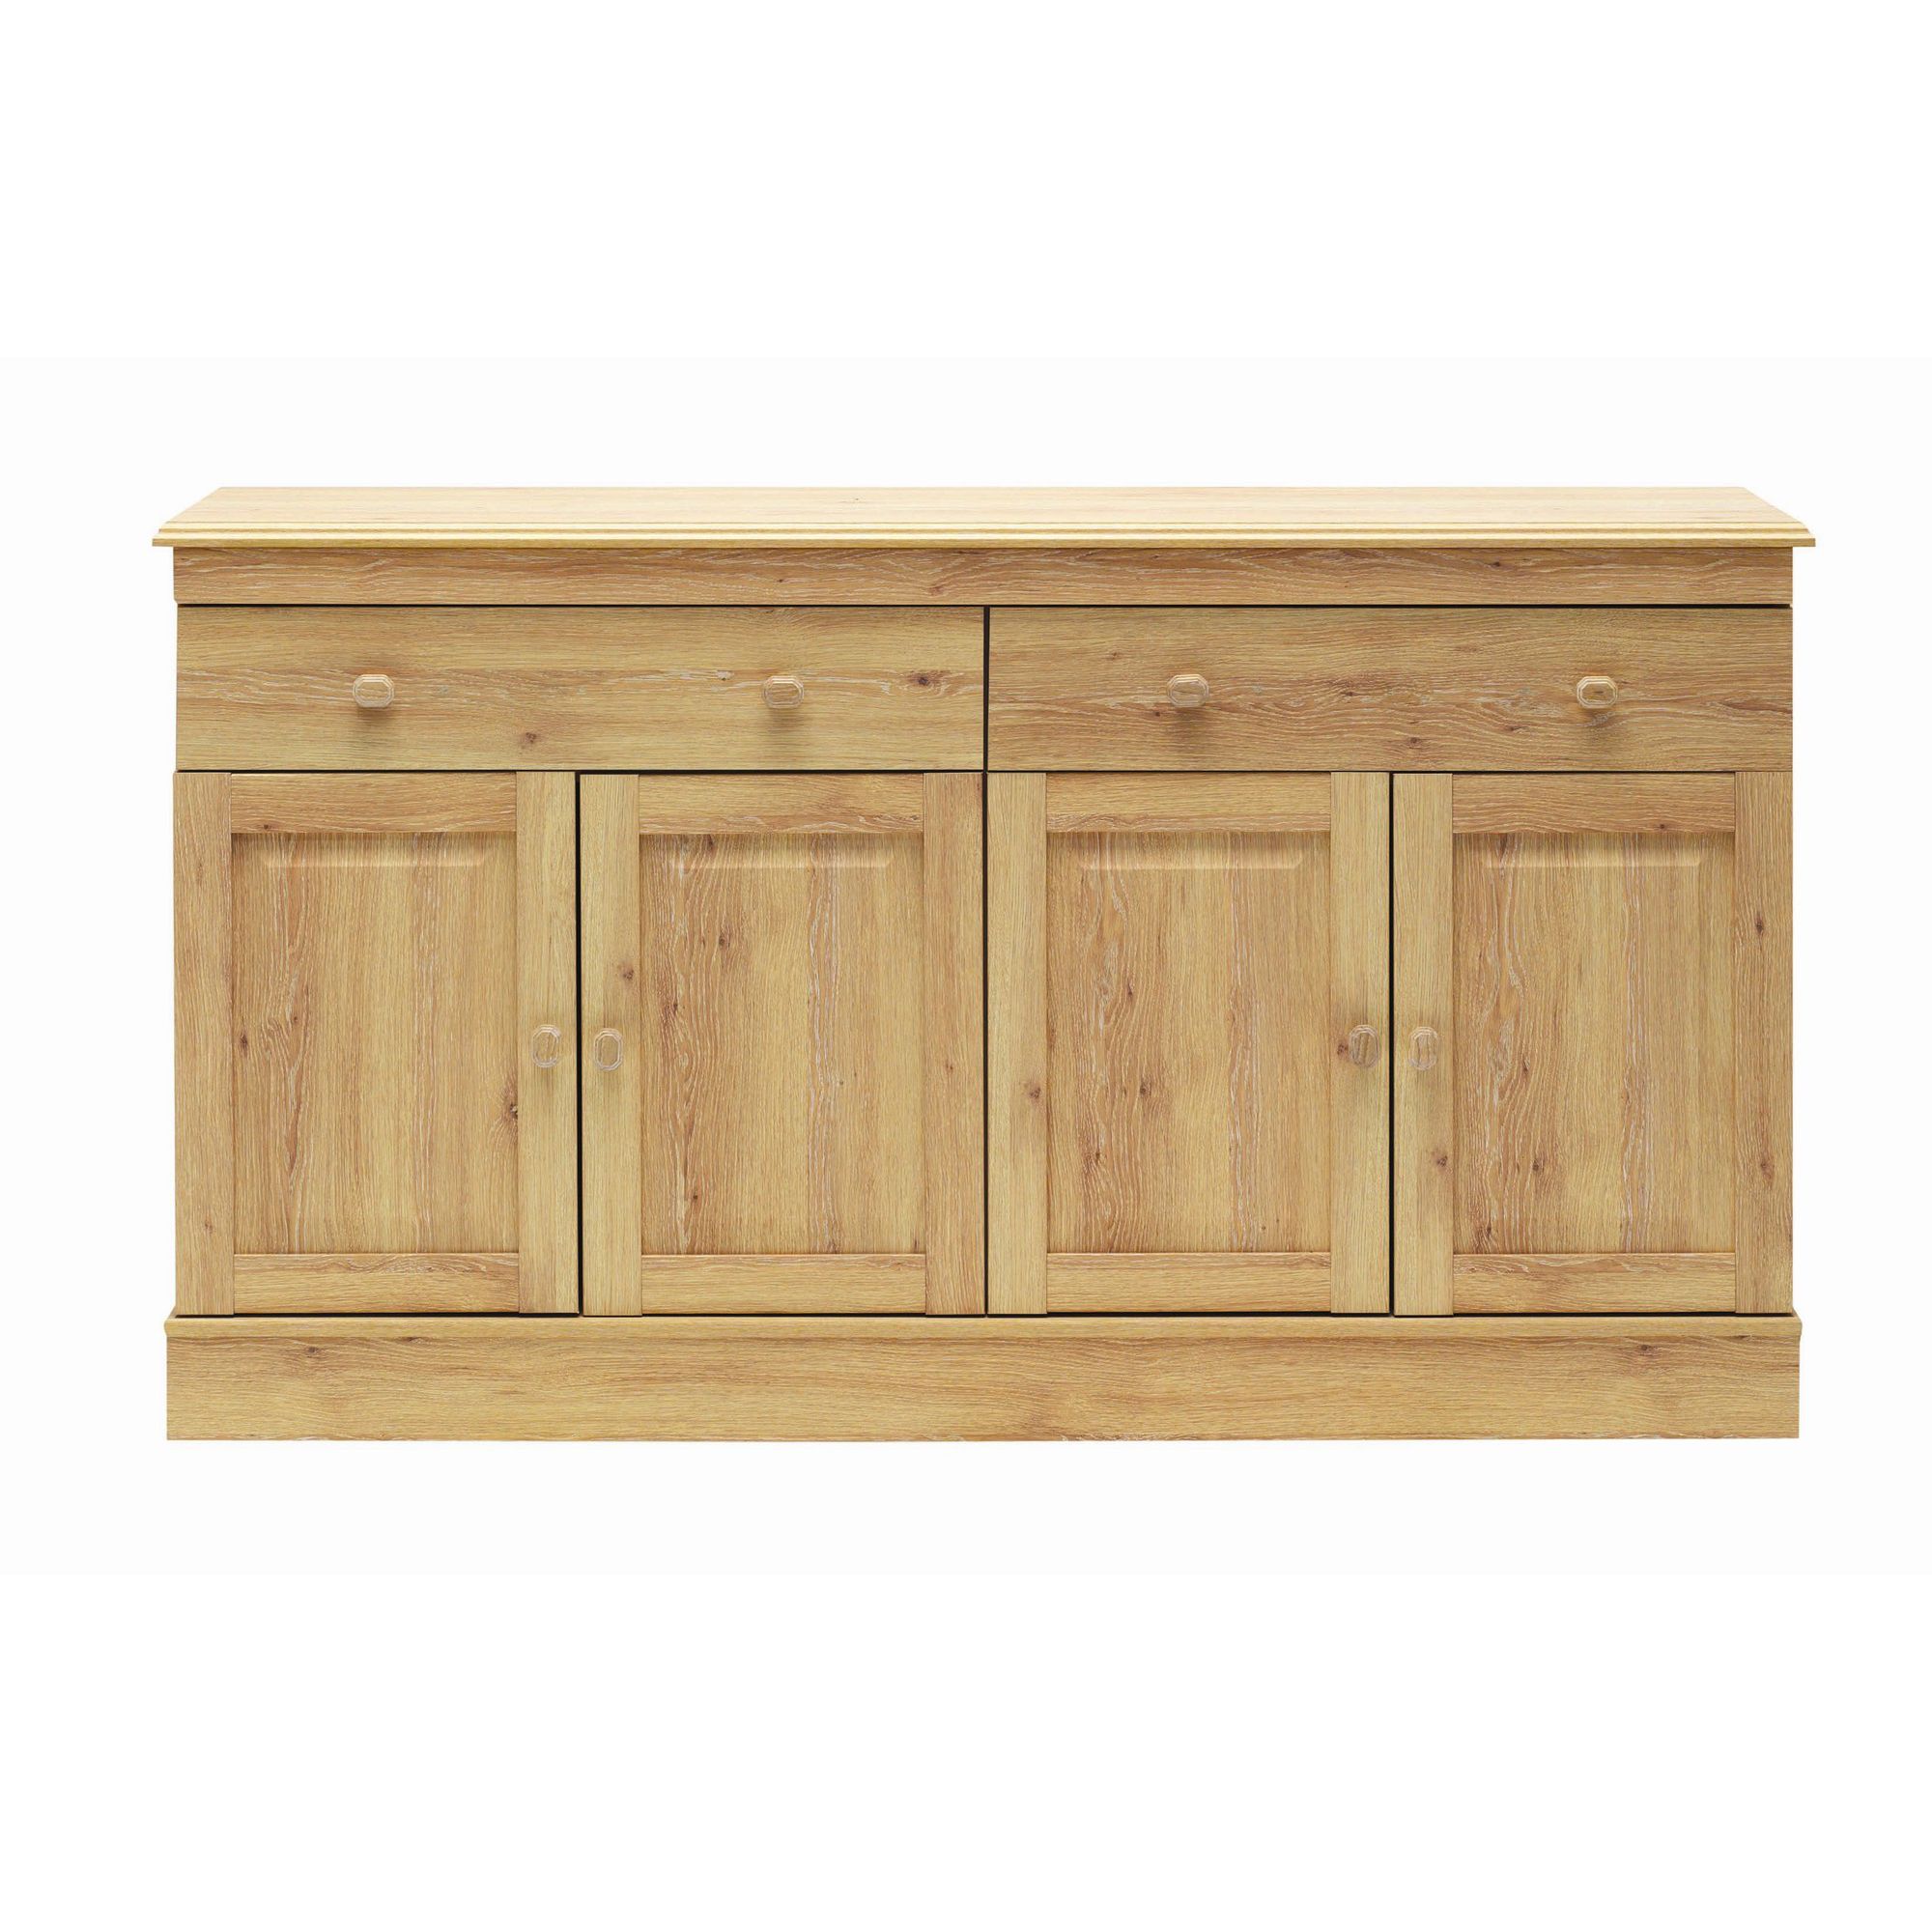 Caxton Driftwood Four Door Sideboard in Limed Oak at Tesco Direct